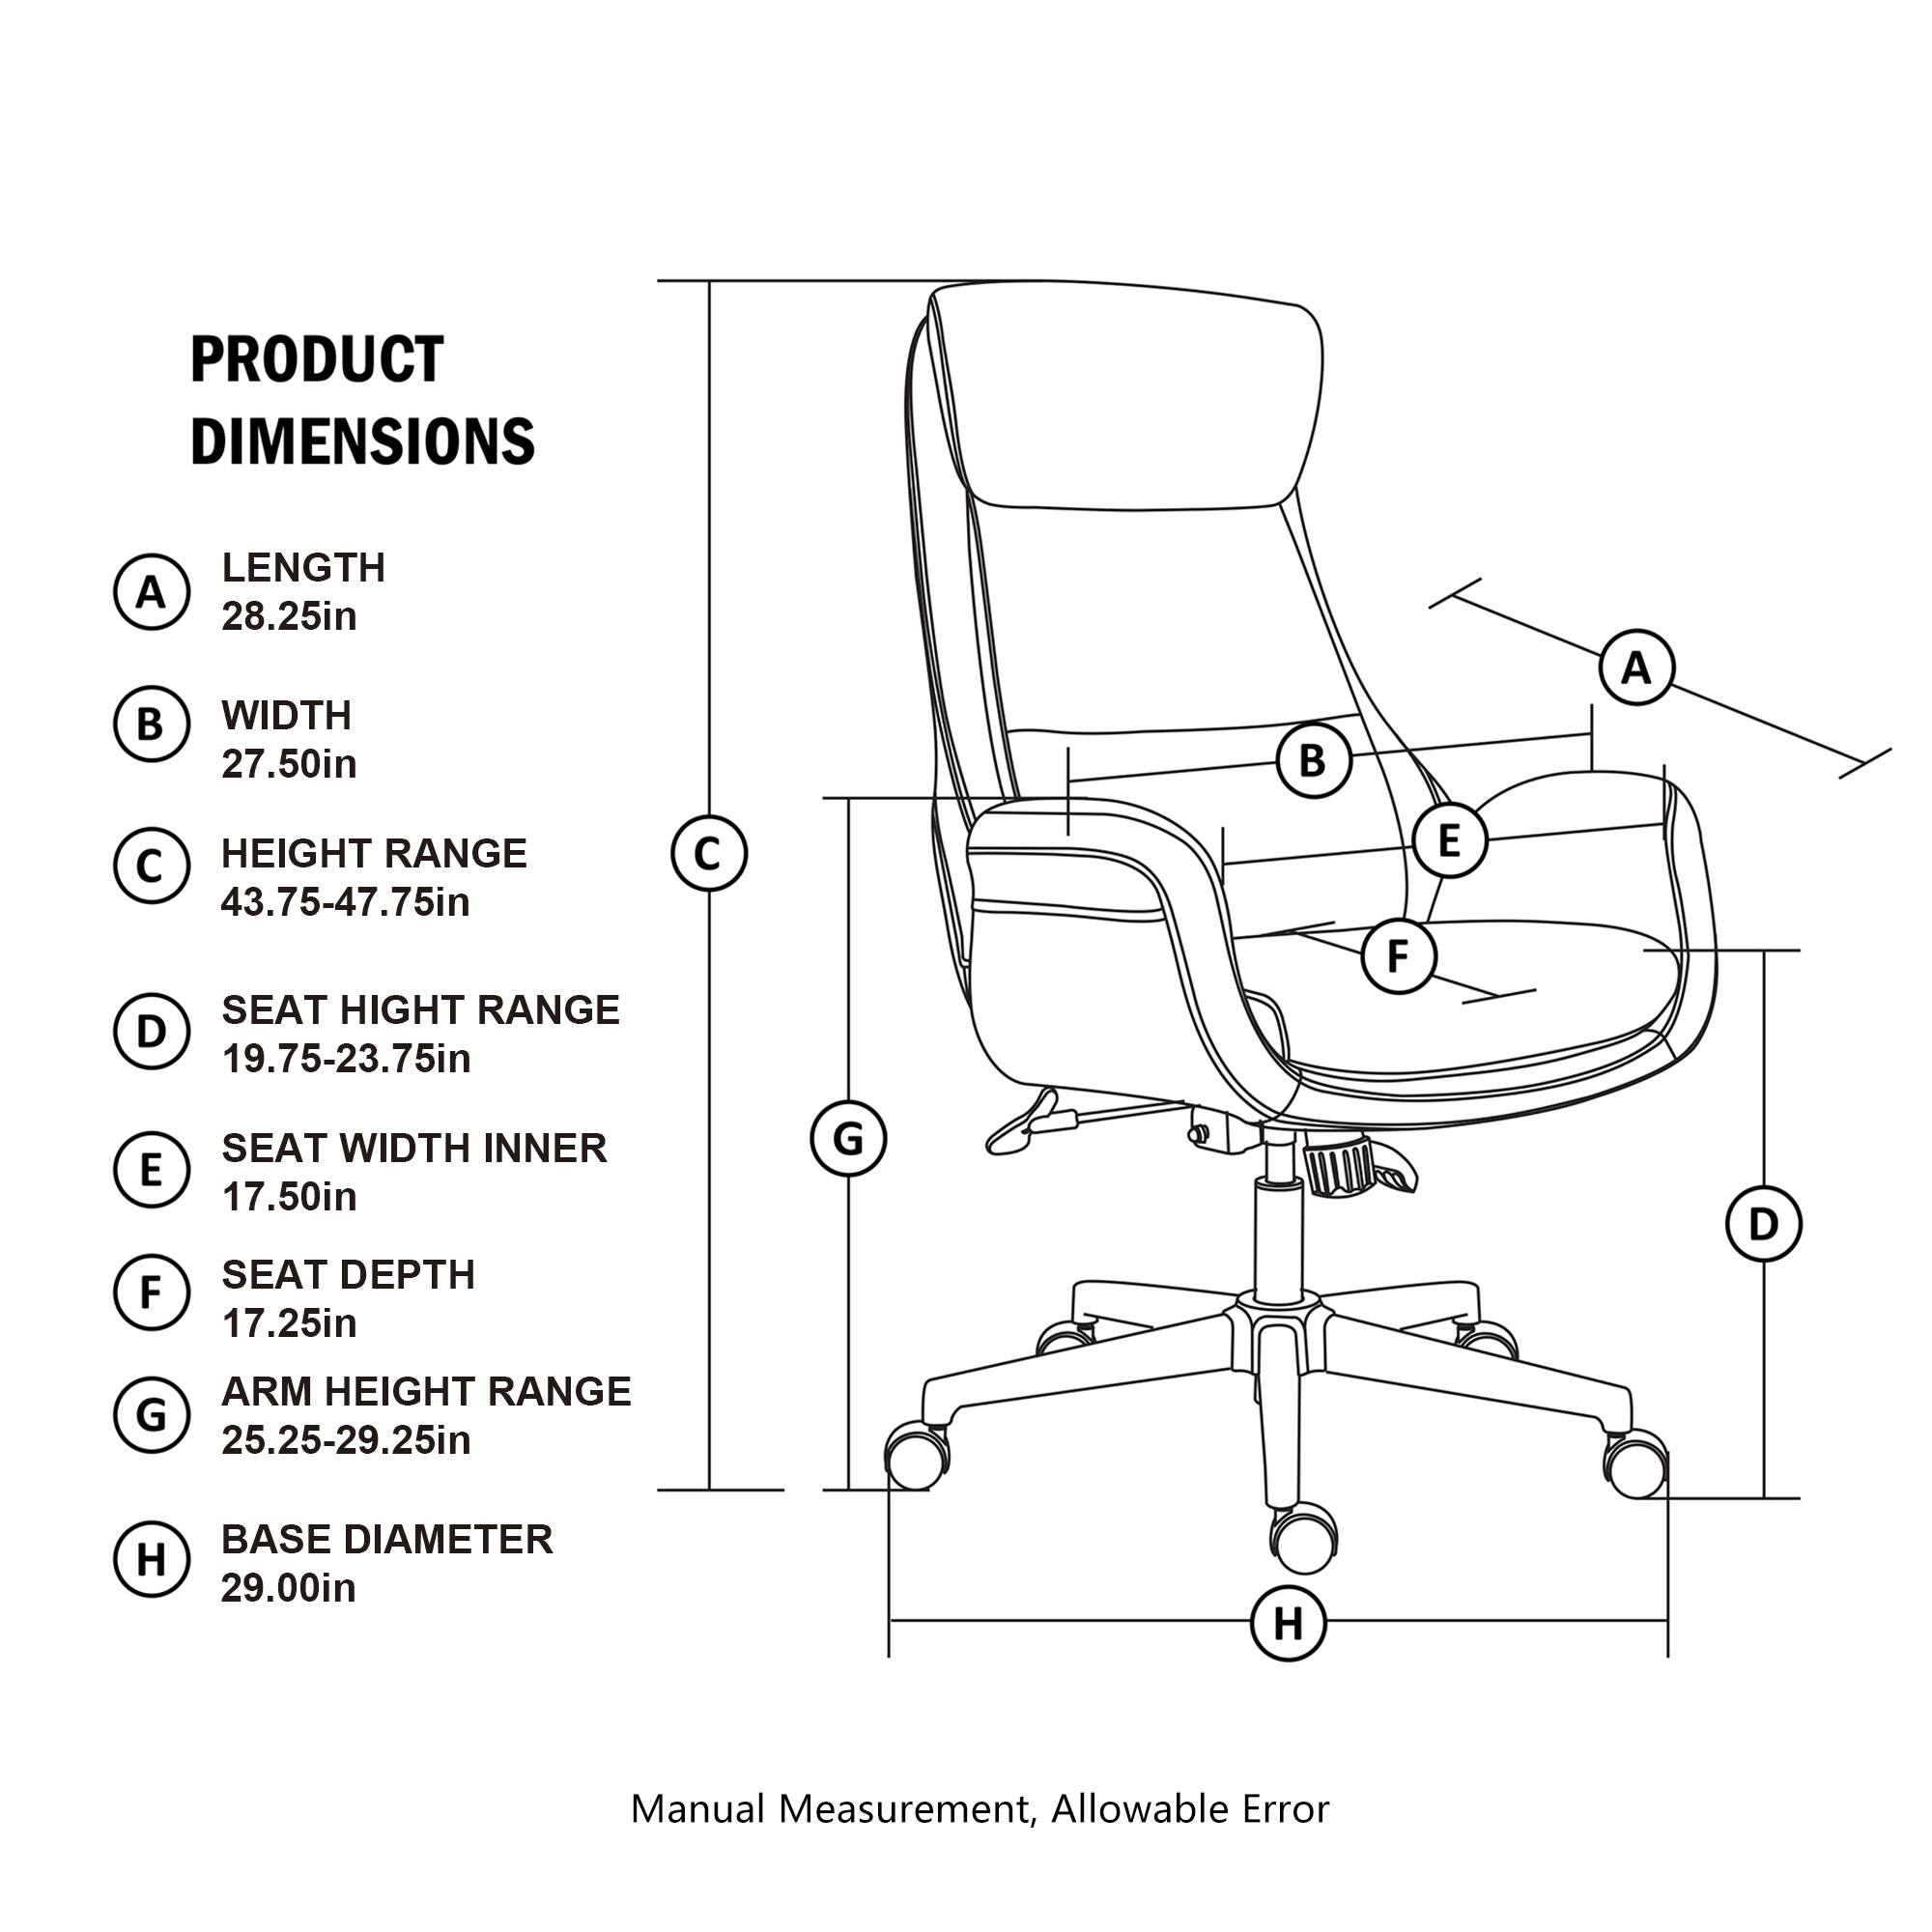 Glitzhome&#xAE; Mid-Century Modern Faux Leather Adjustable High Back Swivel Office Chair